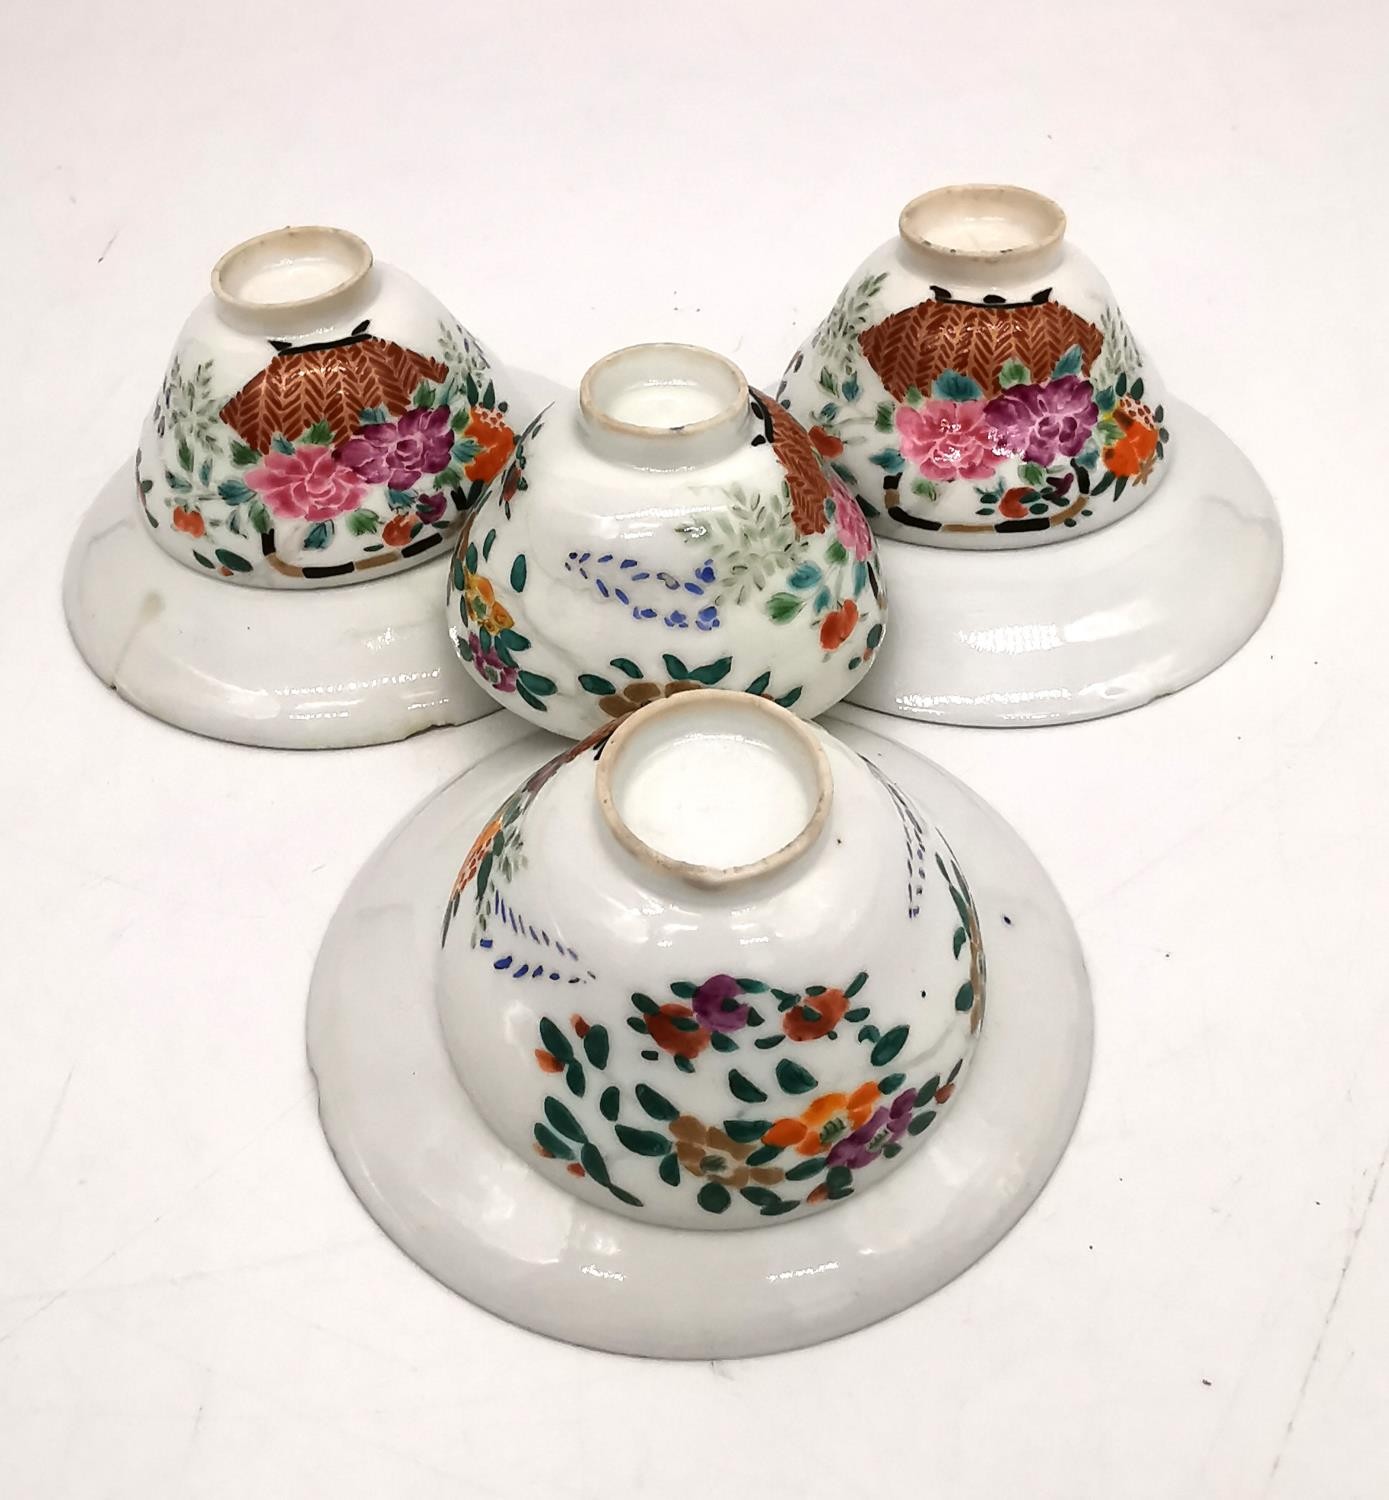 A collection of four Famille rose style egg shell porcelain hand painted tea bowls and three - Image 6 of 7